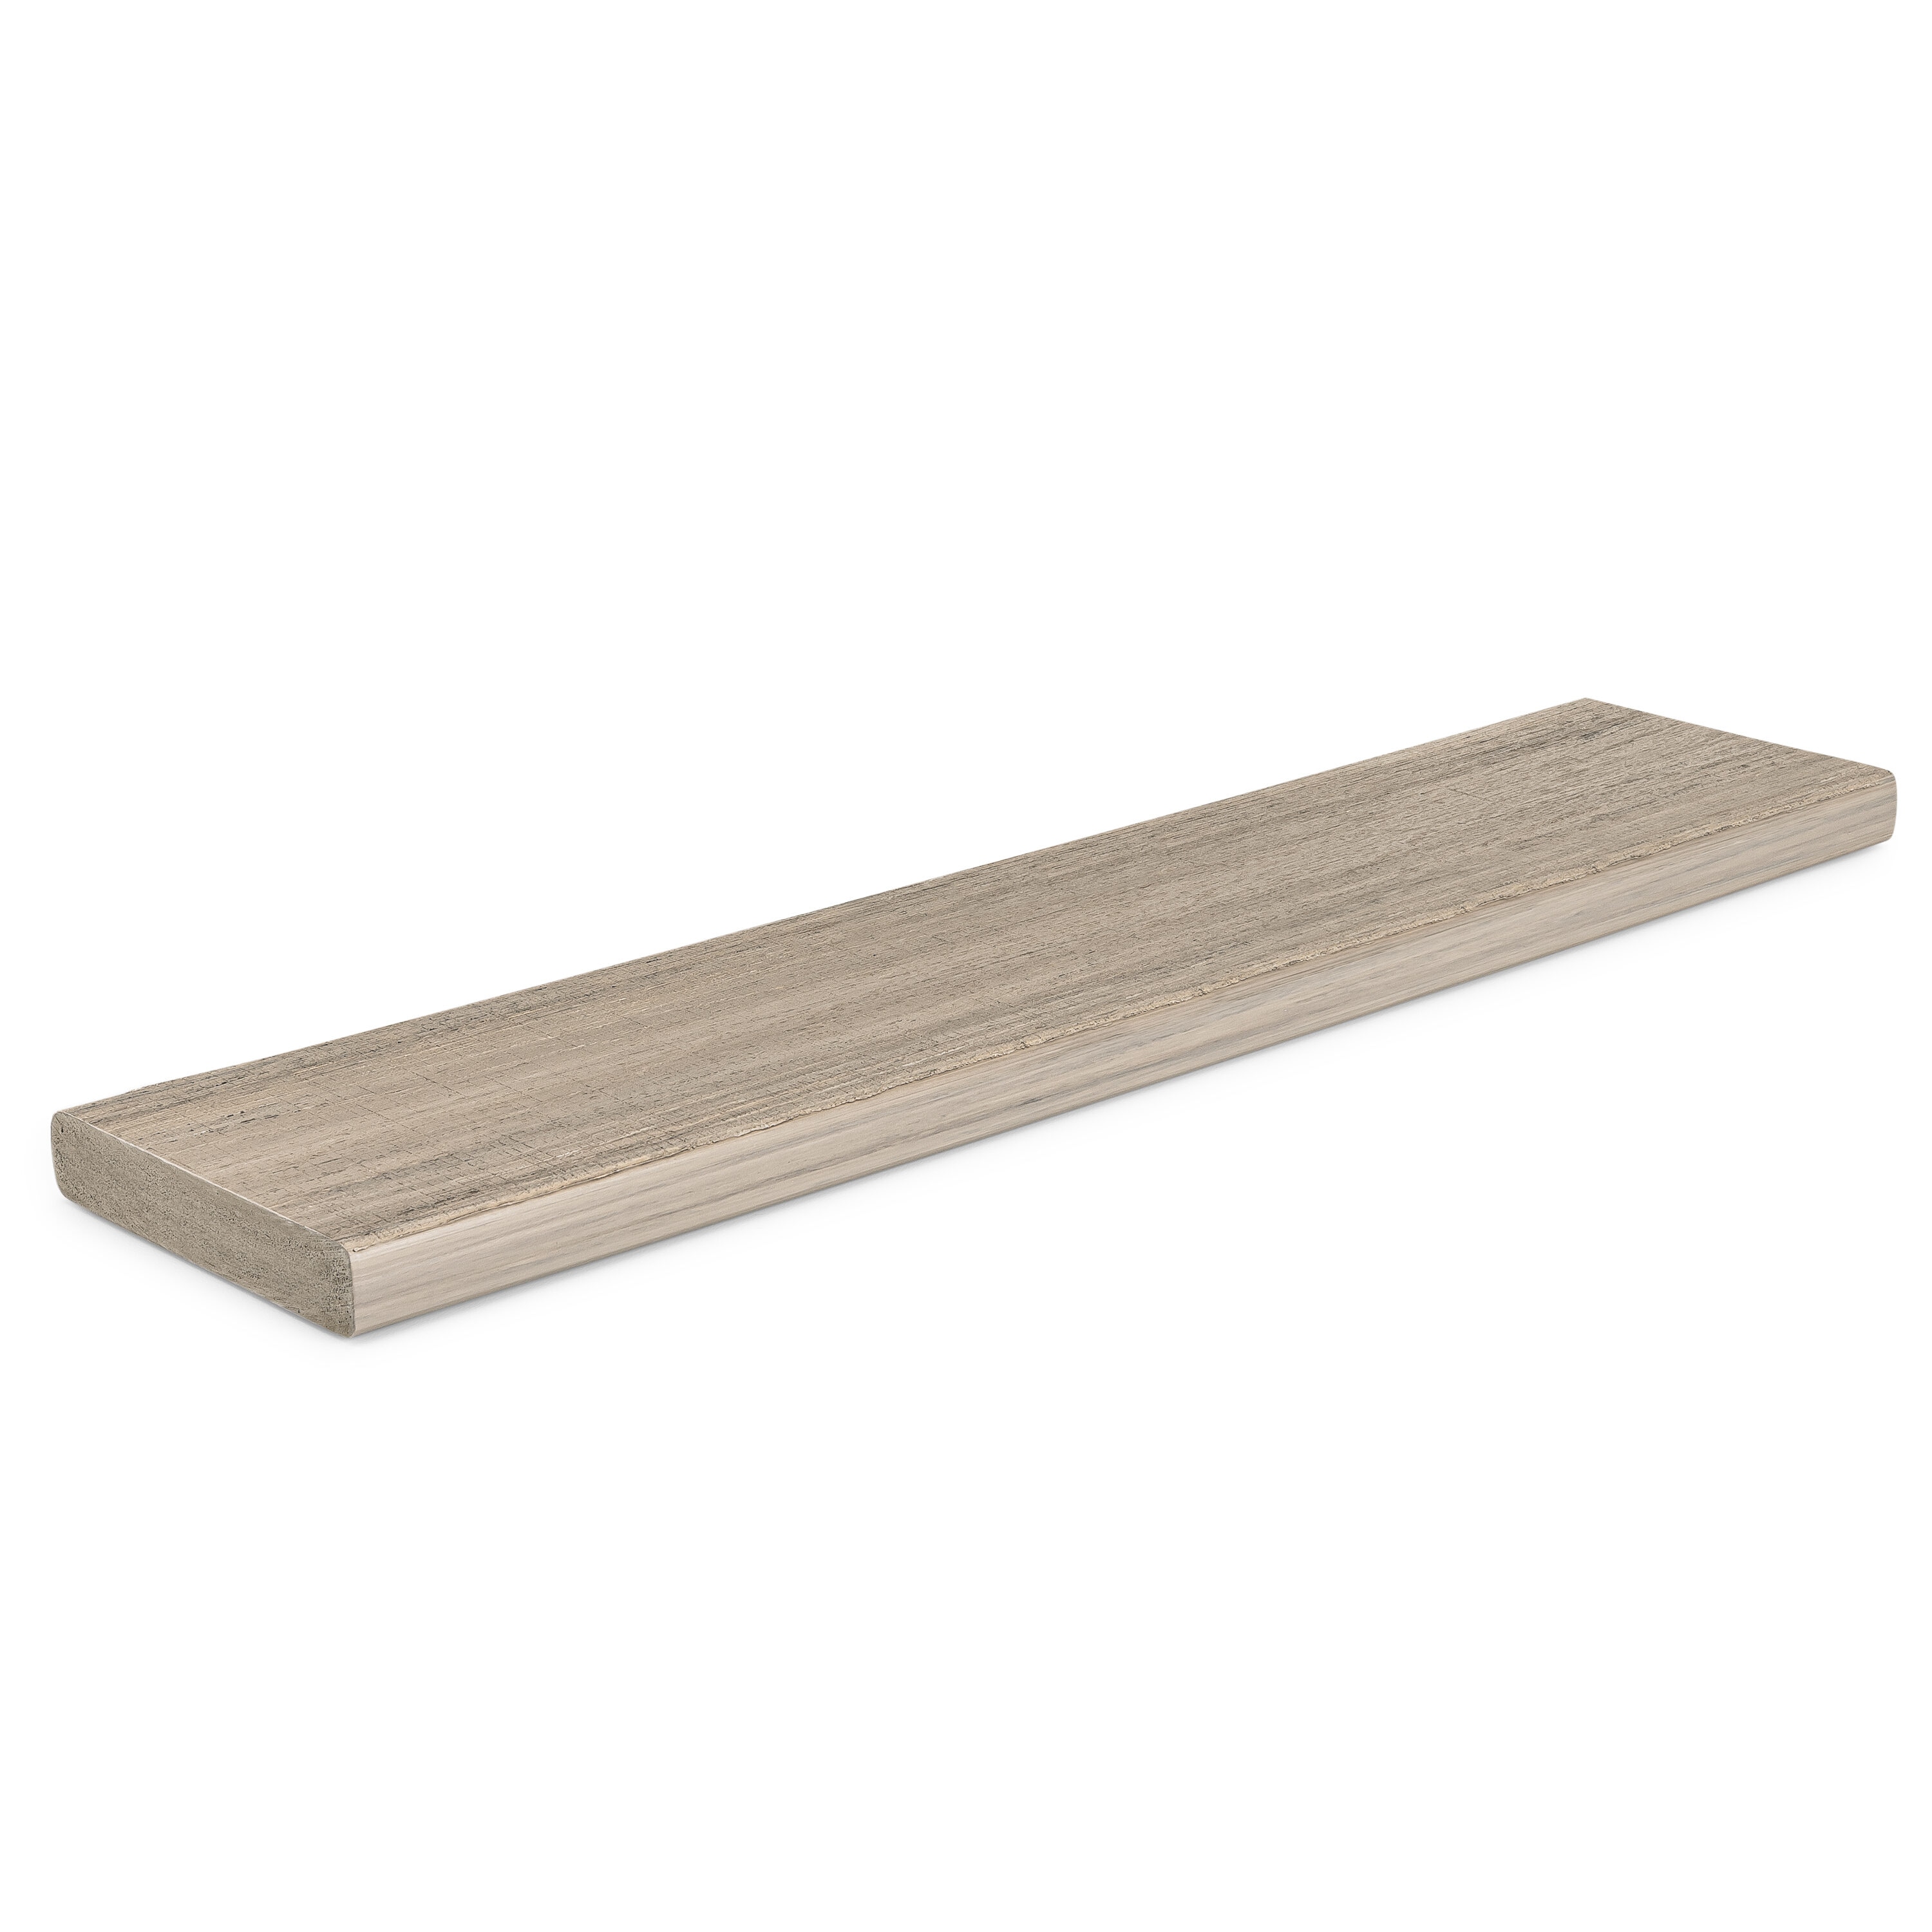 Landmark 5/4-in x 6-in x 20-ft French White Oak Grooved Composite Deck Board in Brown/Tan | - TimberTech AGB15520FW